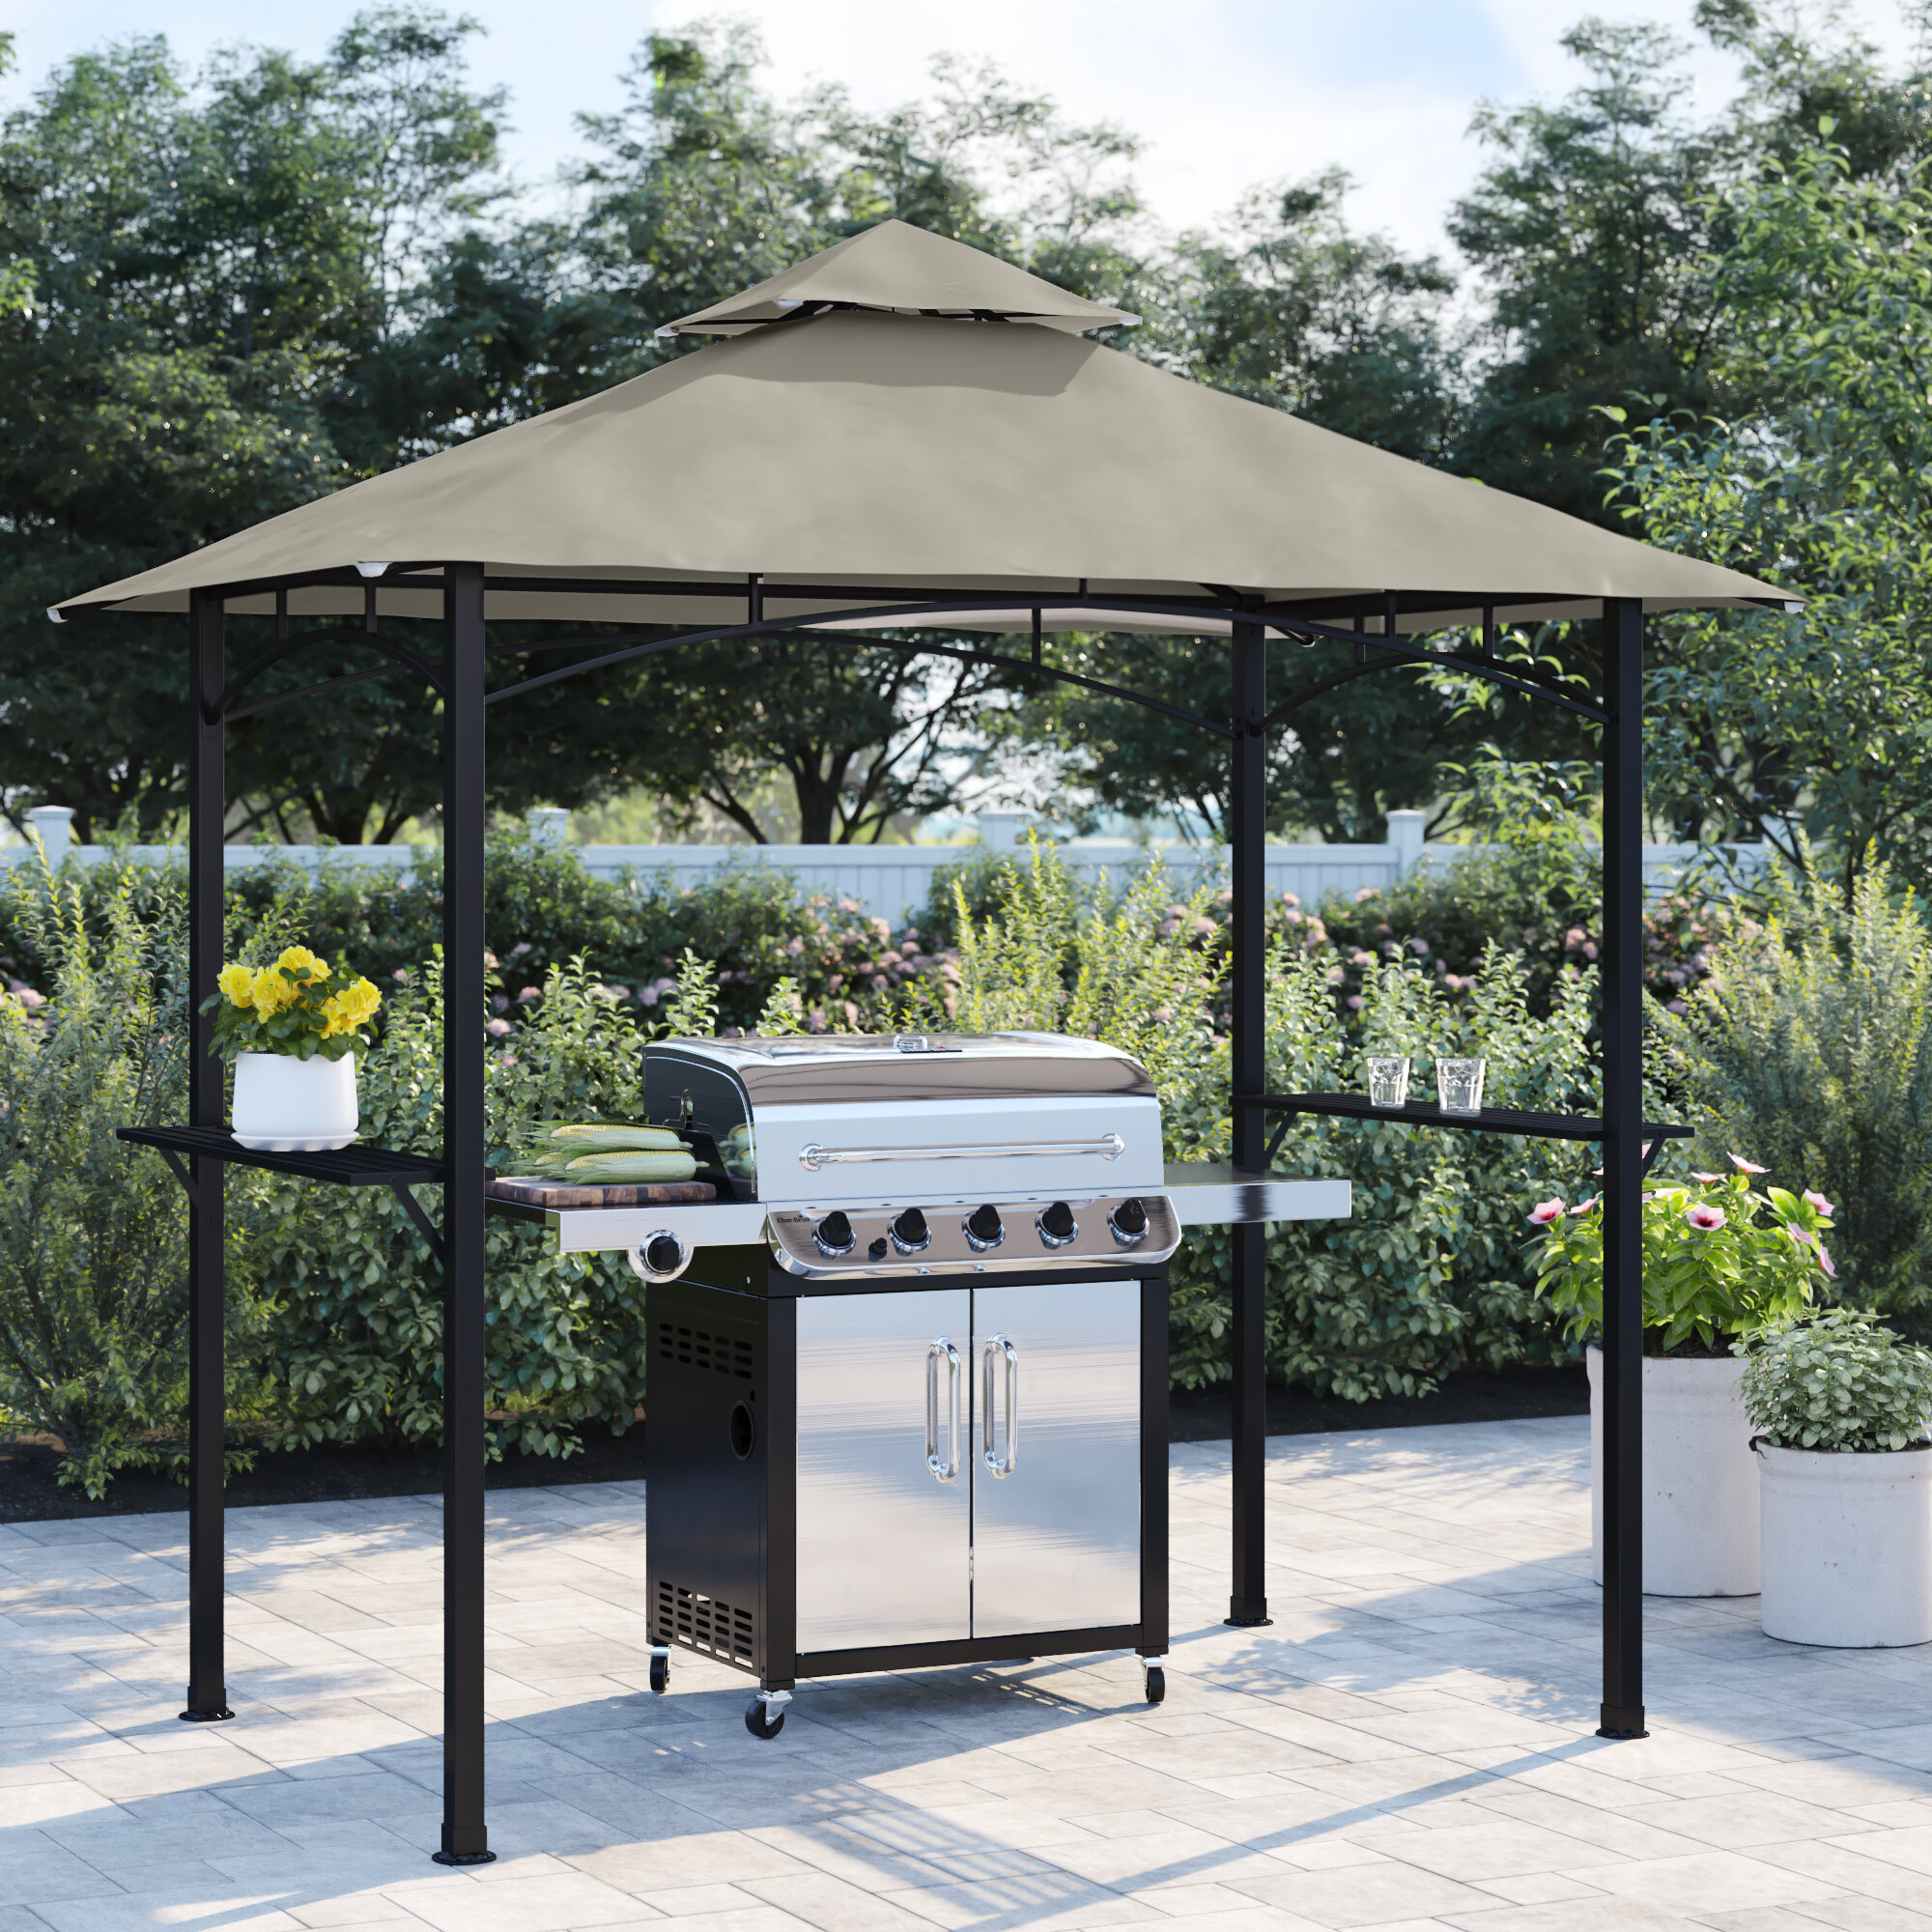 8 ft x 8 ft Gazebo with Top Vent Canopy Steel Metal Frame All Weather Material 